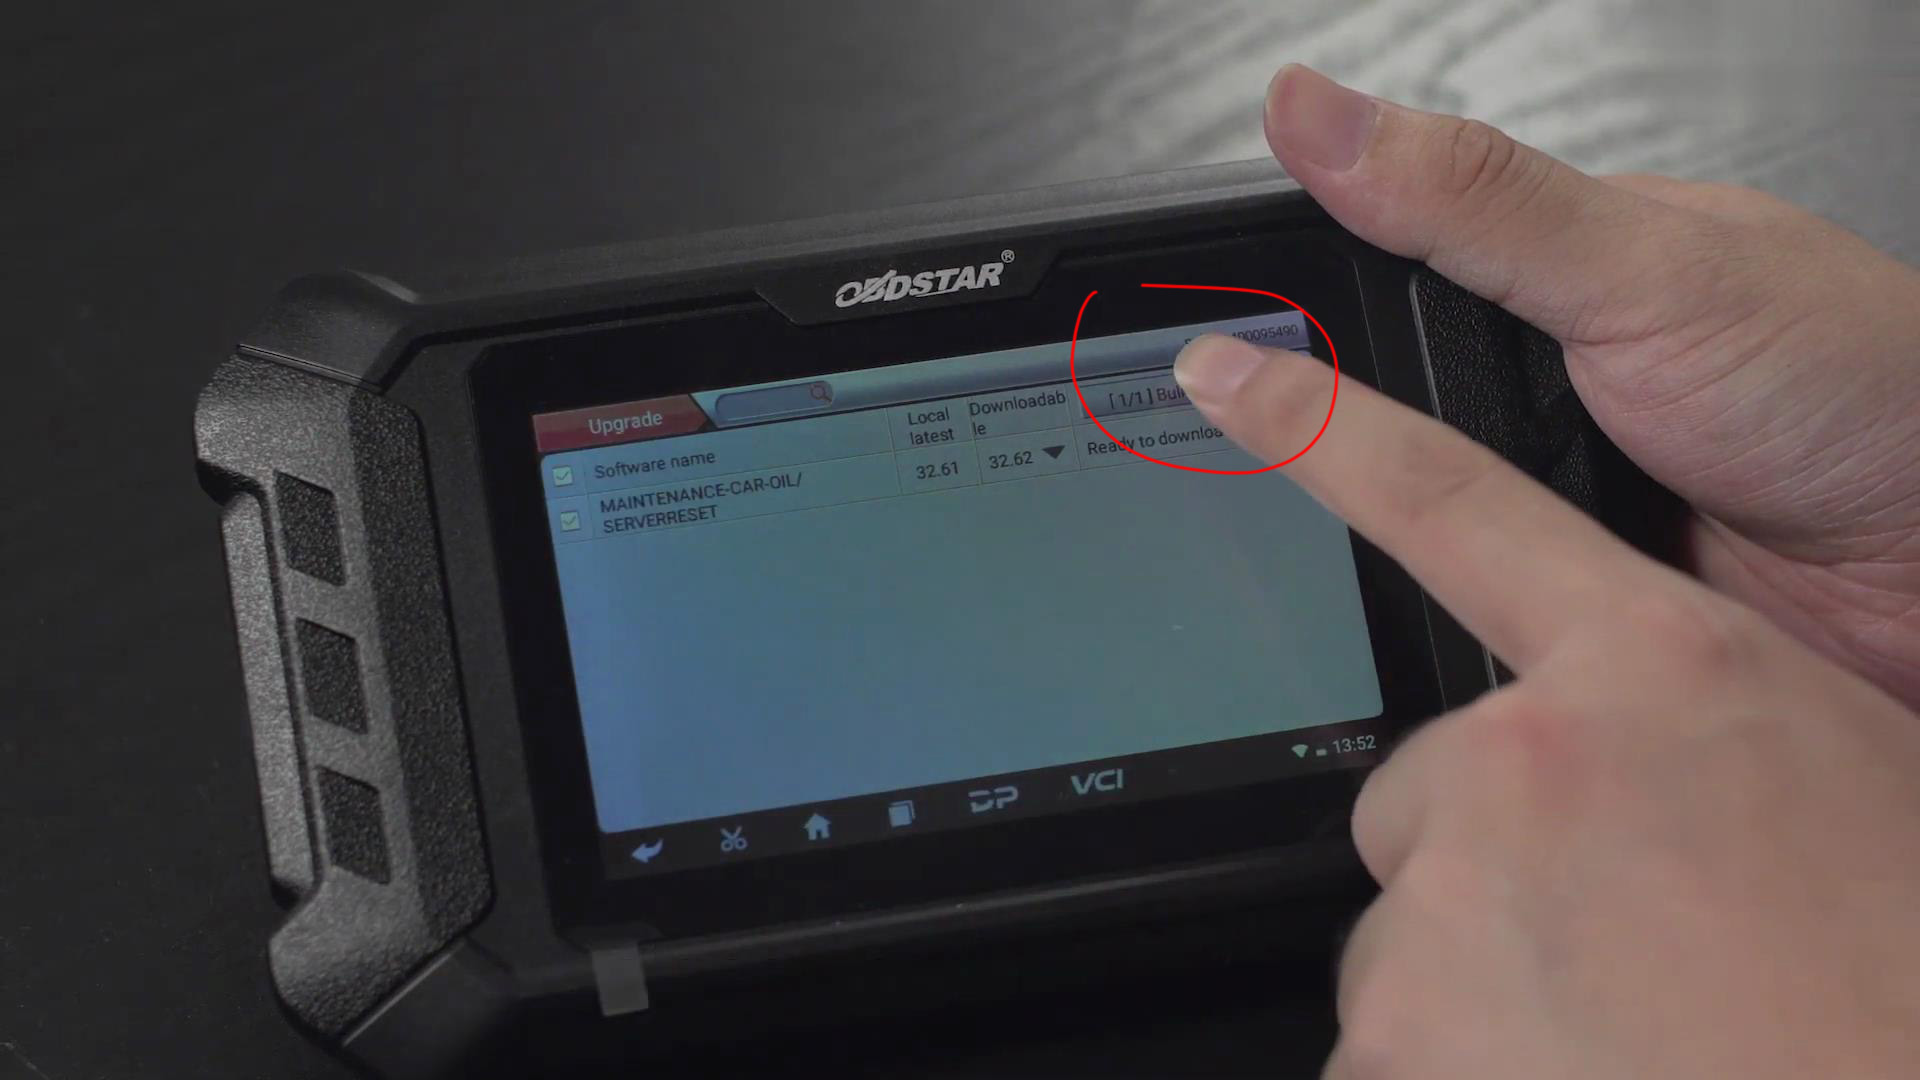 How-to-Register-&-Upgrade-Obdstar-X300-MINI-Scan-Tool-9